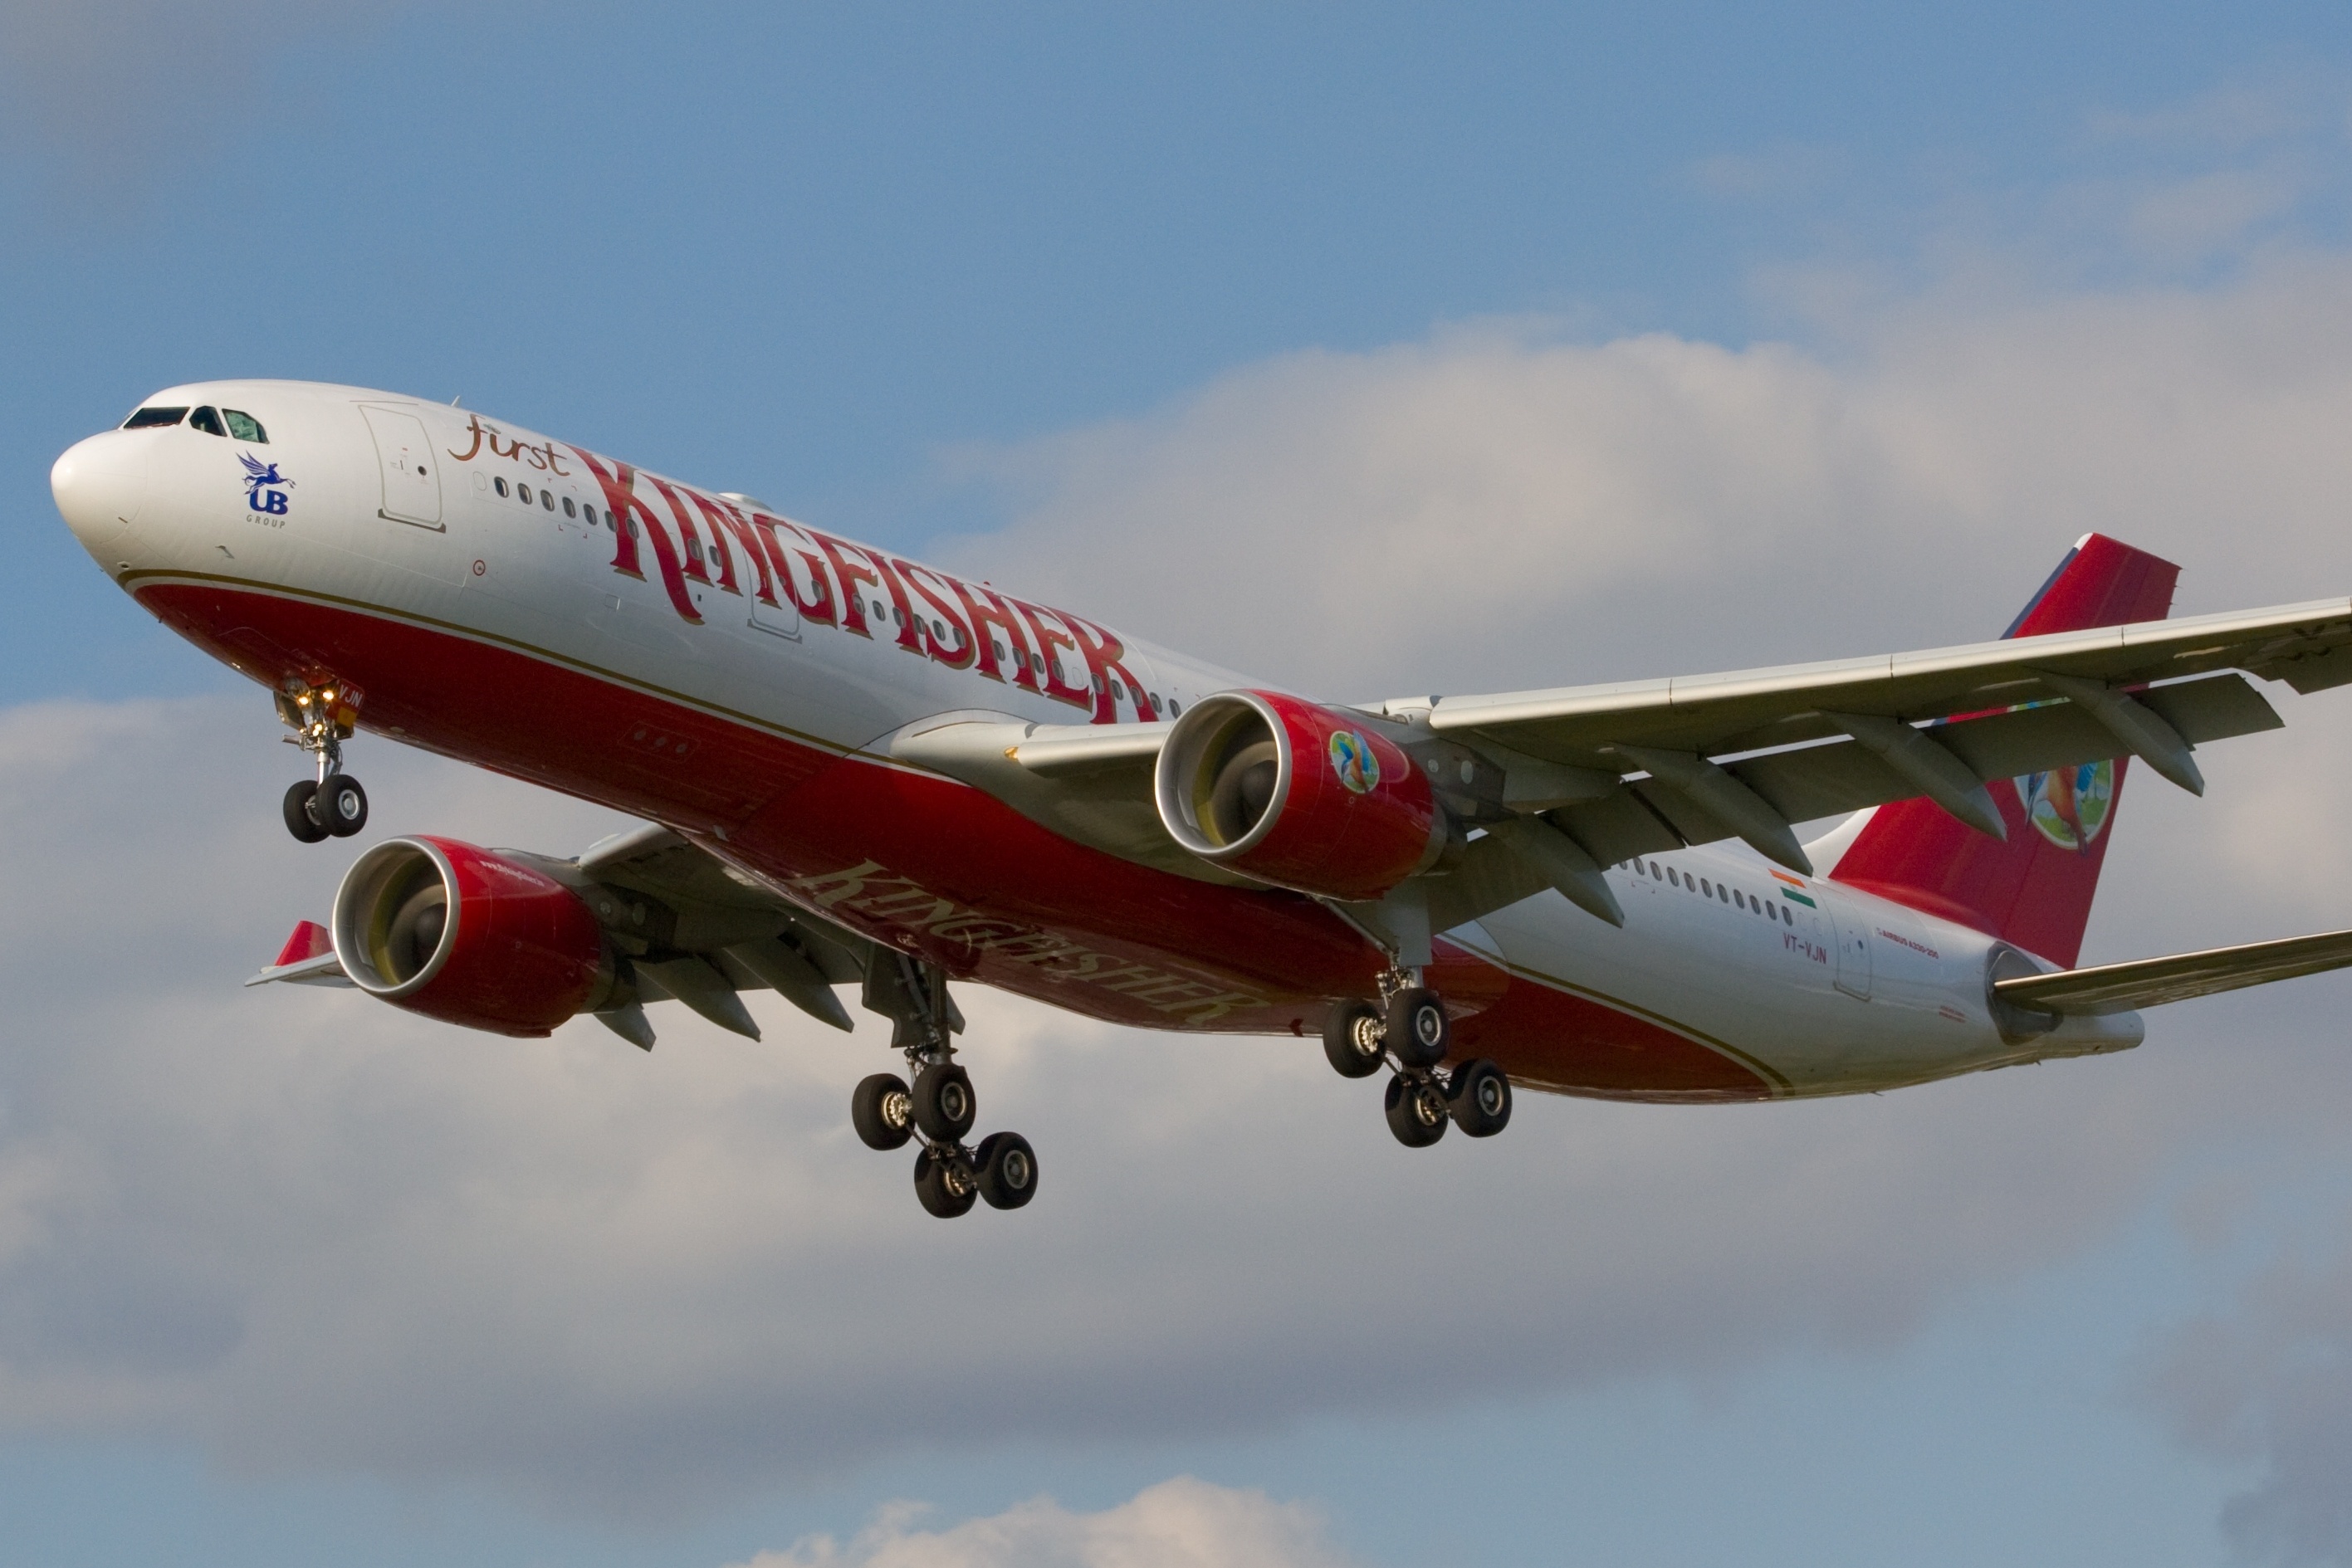 Kingfisher Airlines, Airbus A330-200, Infinite Flight community, Aviation enthusiasts, 2840x1890 HD Desktop